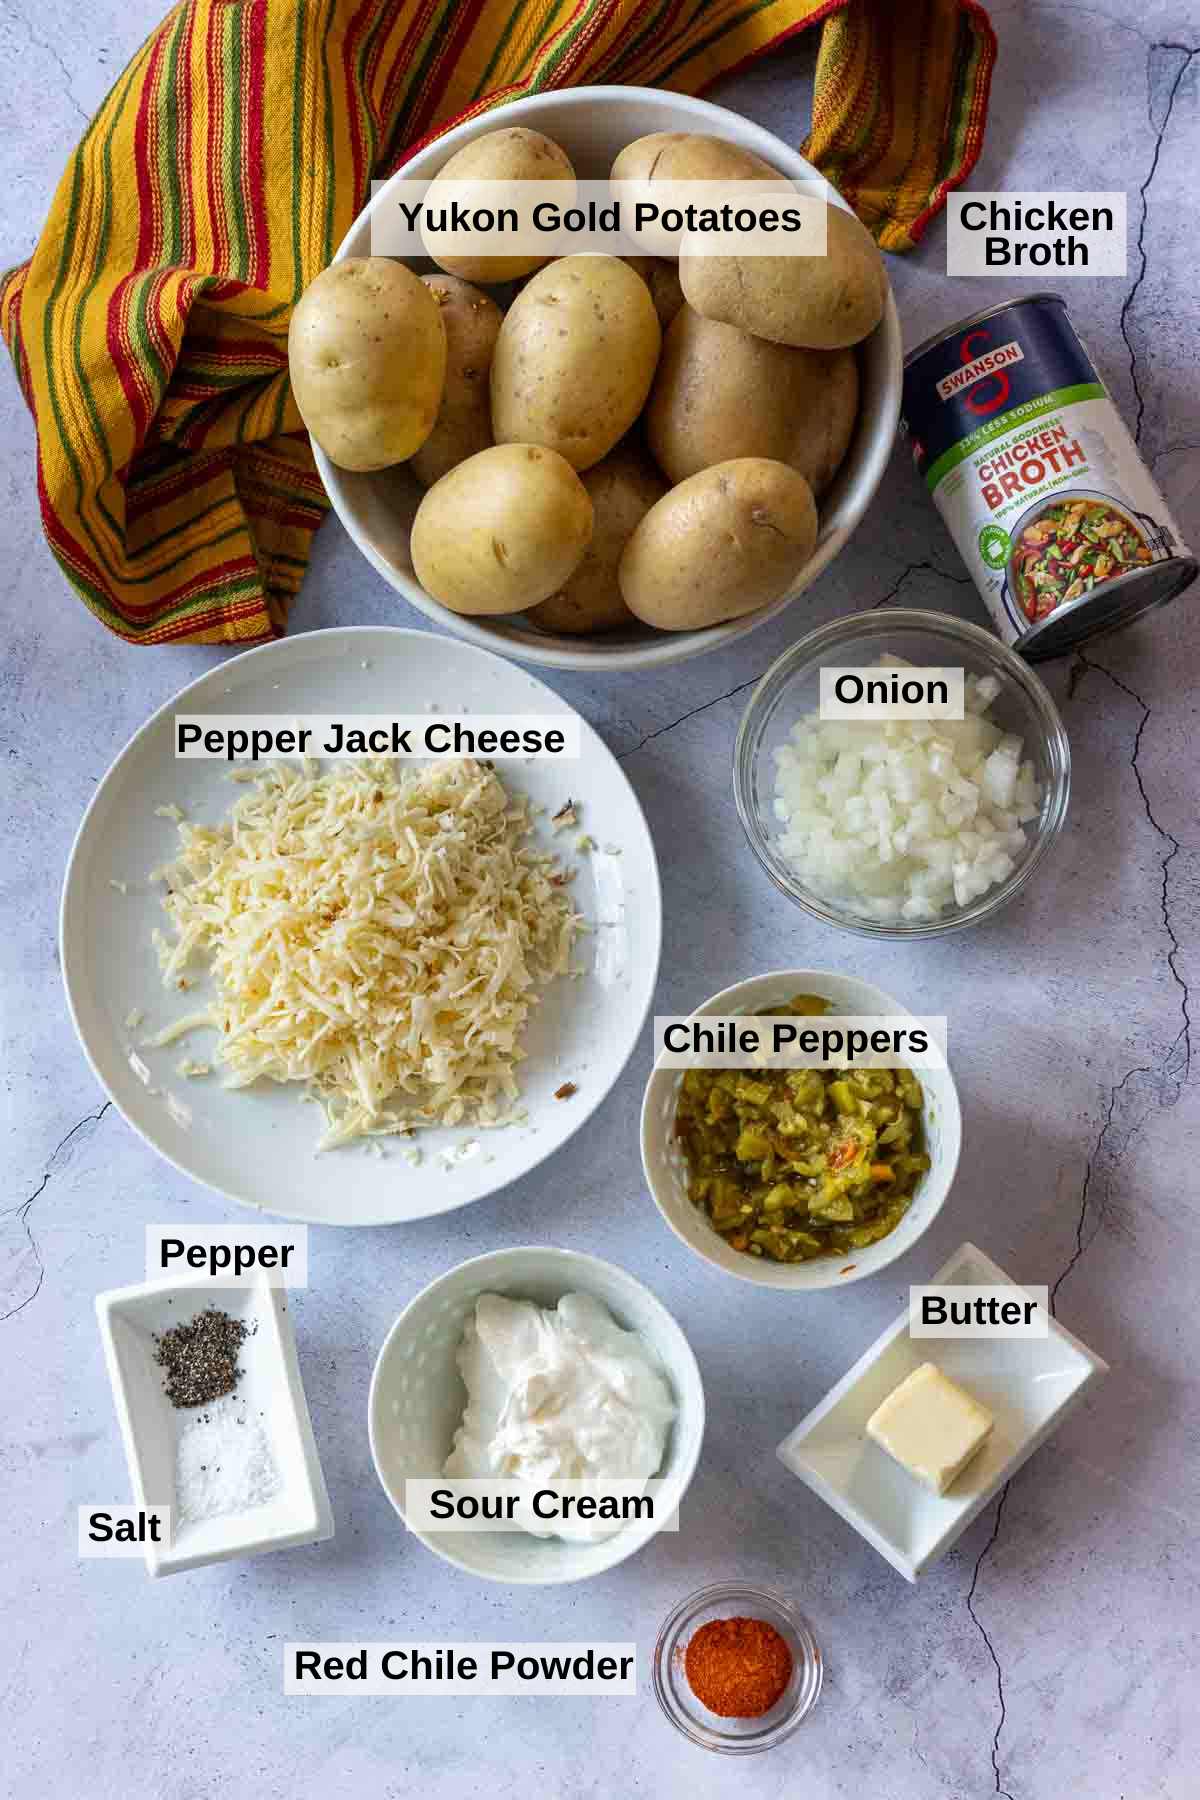 Ingredients to make instant pot scalloped potatoes.